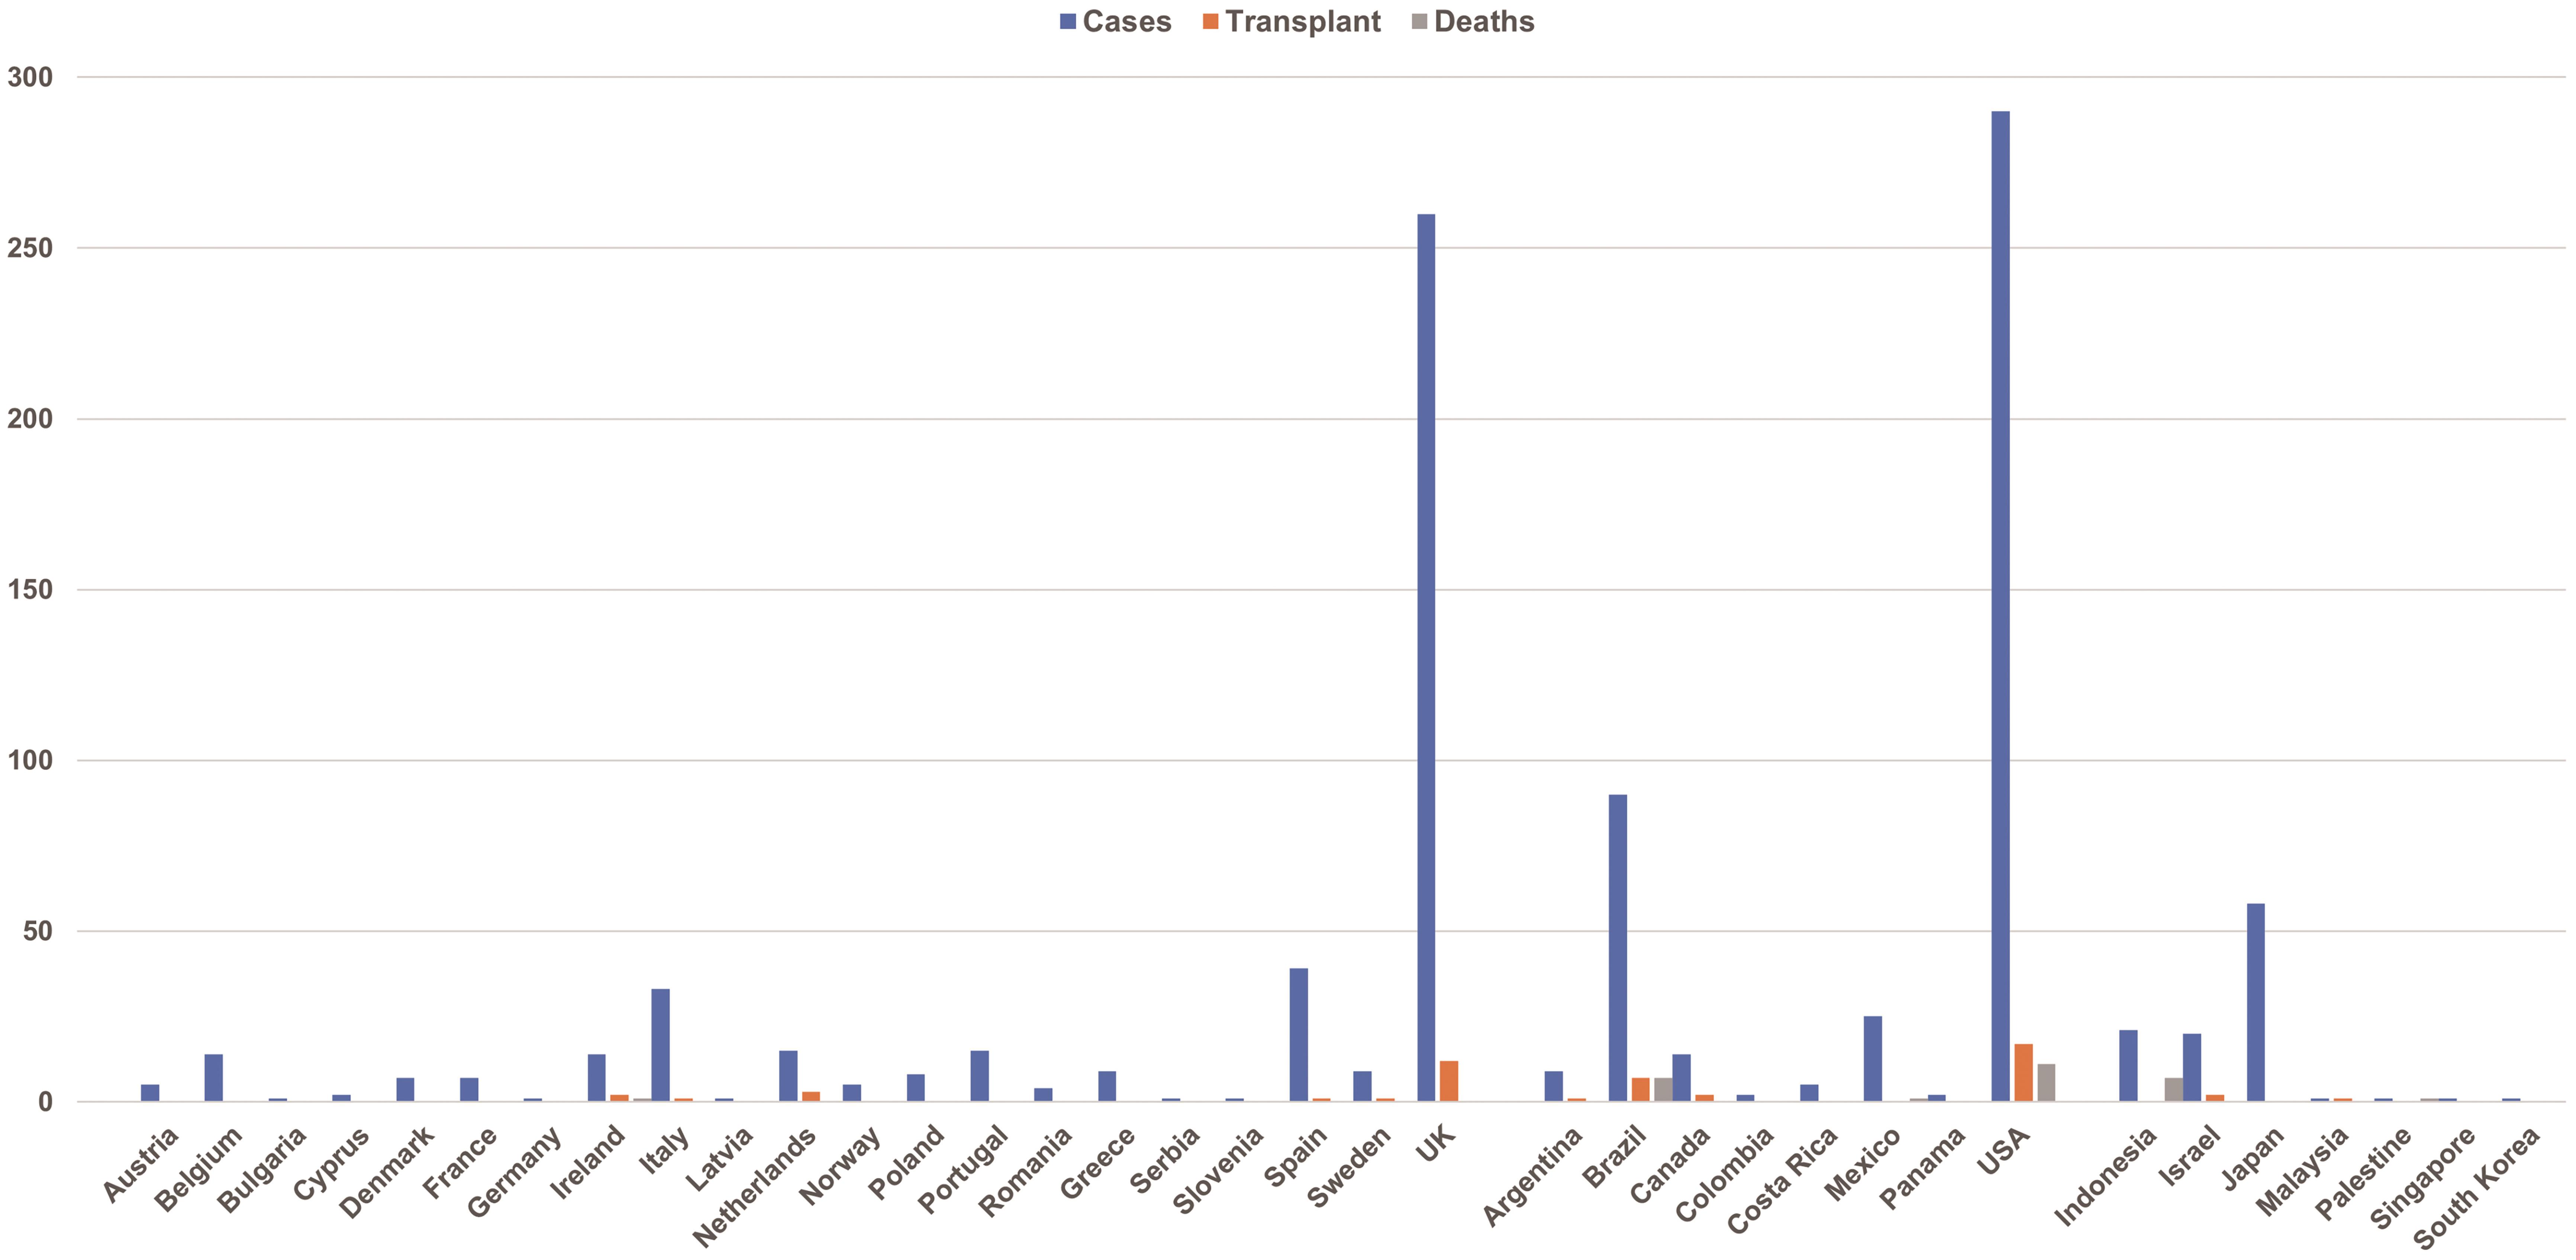 Worldwide distribution of cases, transplants, and deaths from severe acute hepatitis of unknown origin in children as of June 17, 2022.